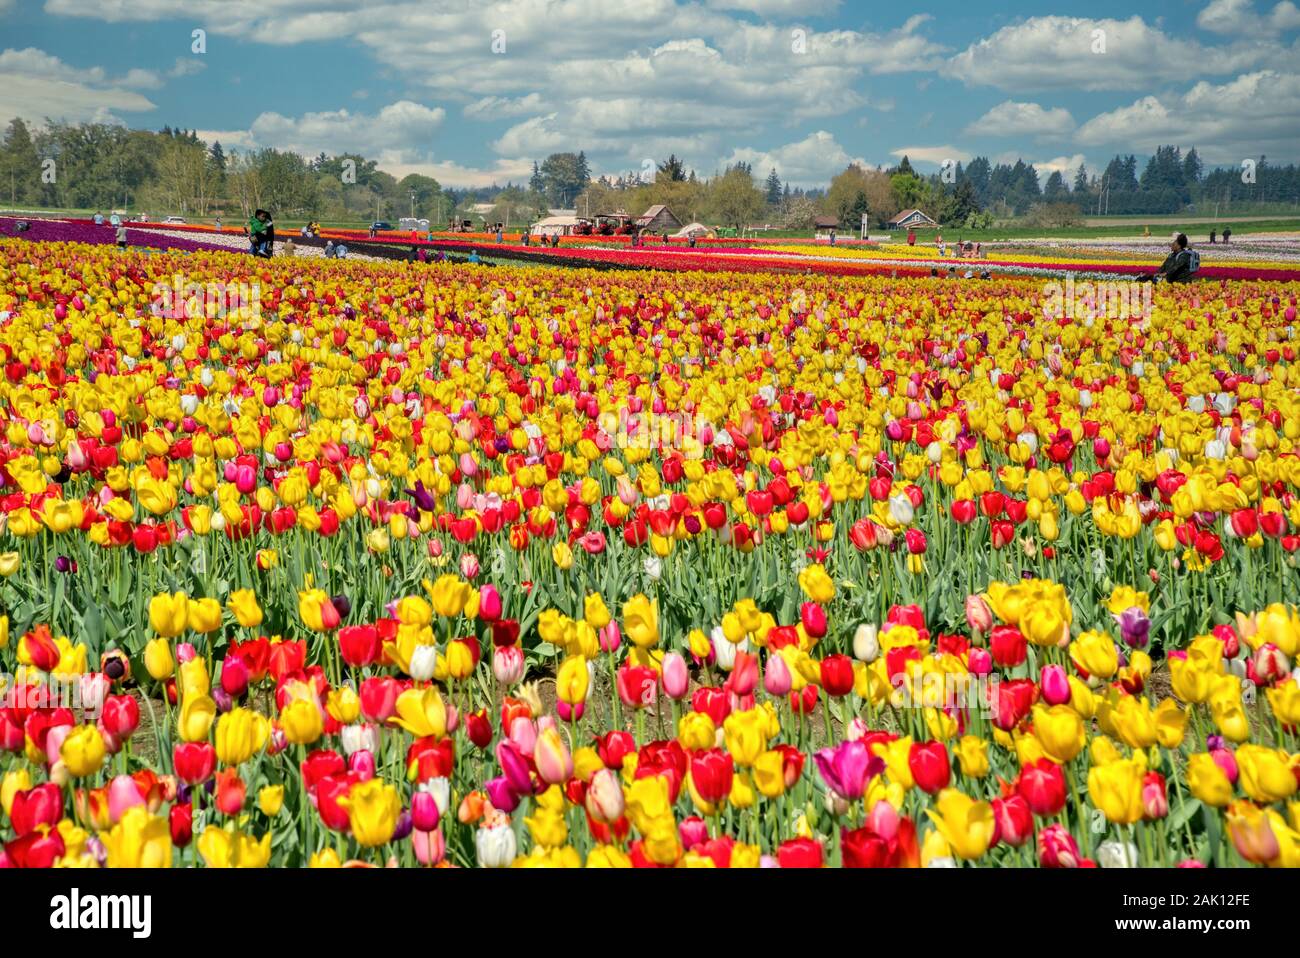 The annual Tulip Fest at the Wooden Shoe Tulip Farm, located in Woodburn, Oregon, will start on March 20th, 2020 and go through the first week in May. Stock Photo